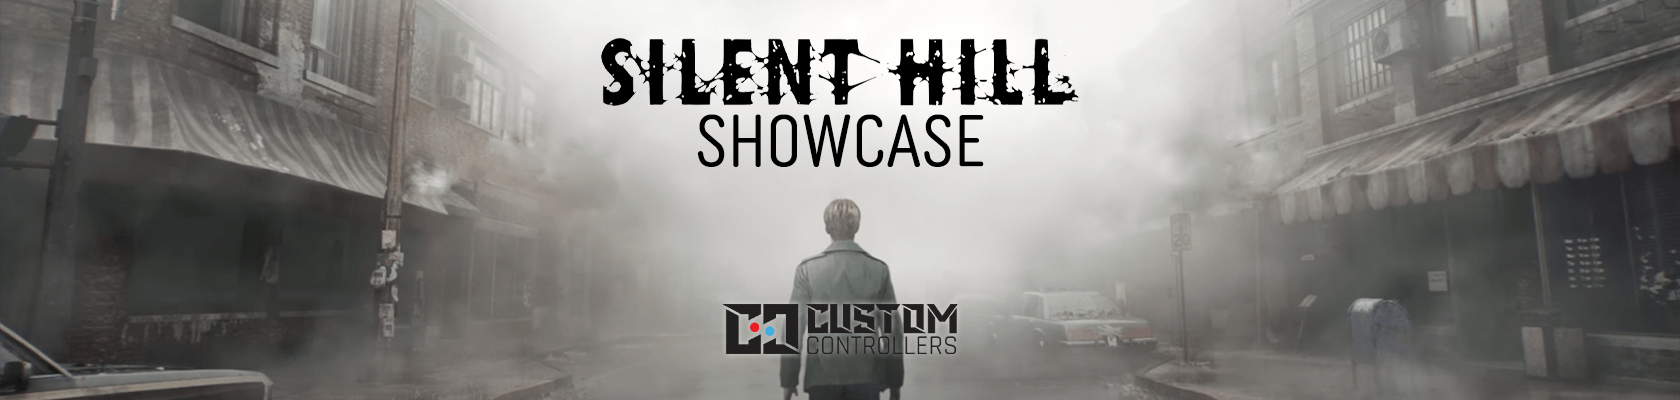 Everything Revealed in the Silent Hill Showcase-Custom Controllers UK